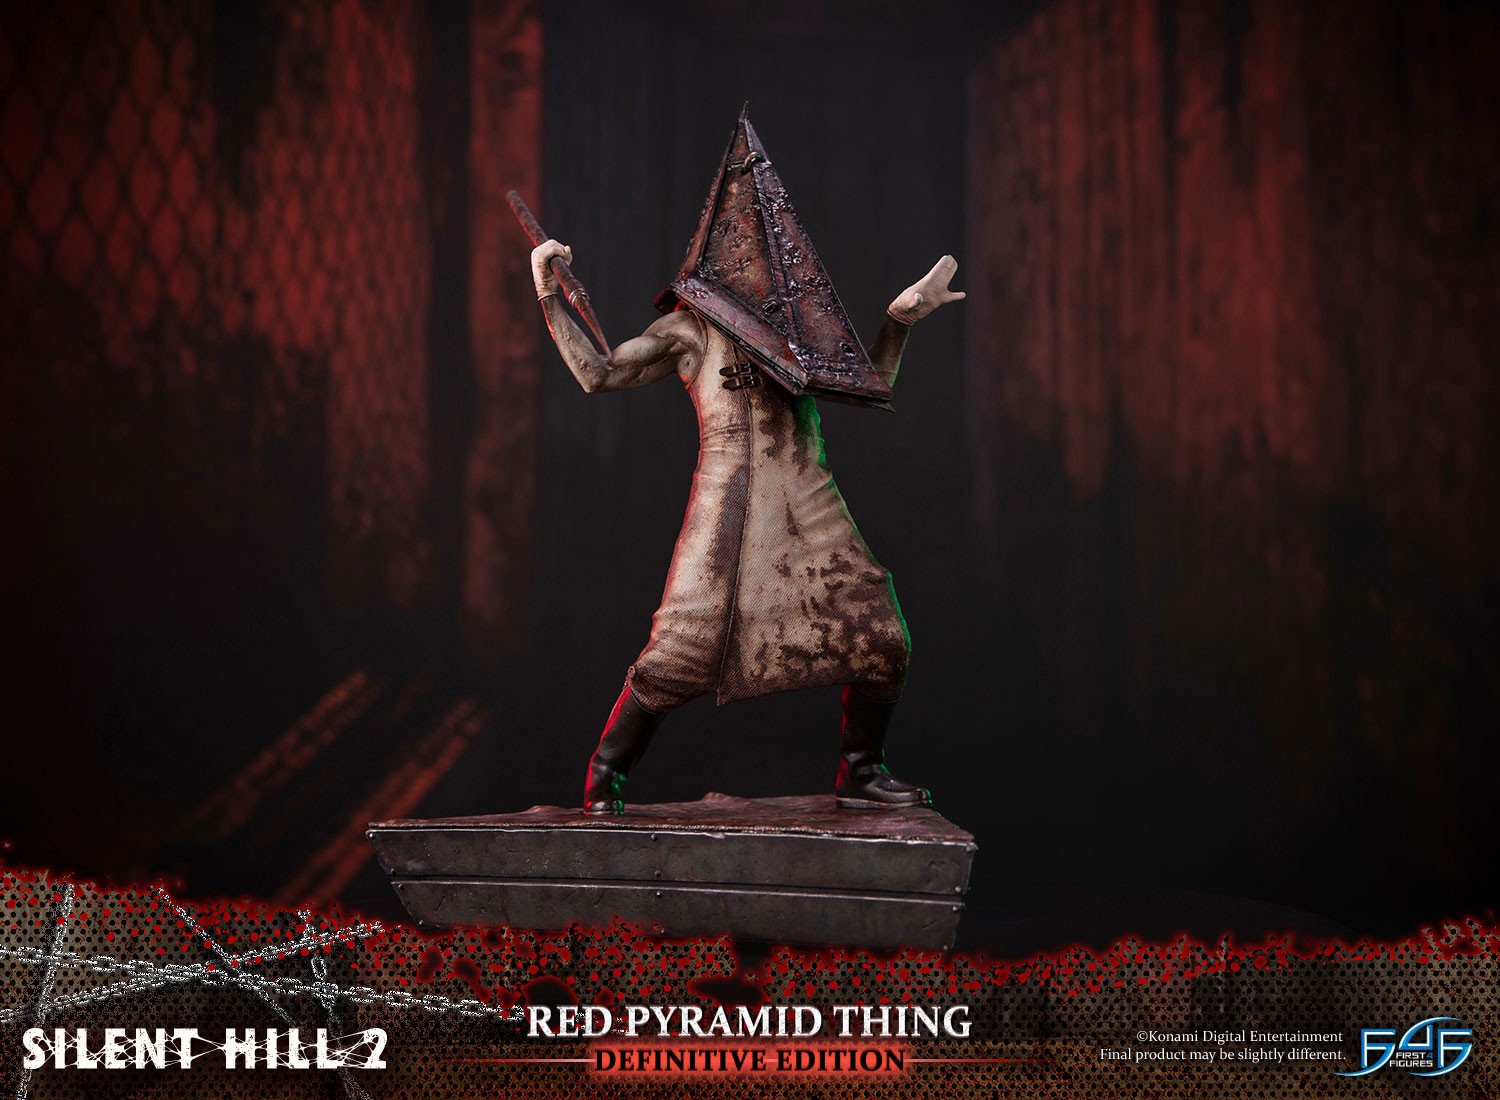 Pre-Order, Silent Hill 2 – Red Pyramid Thing Definitive Edition